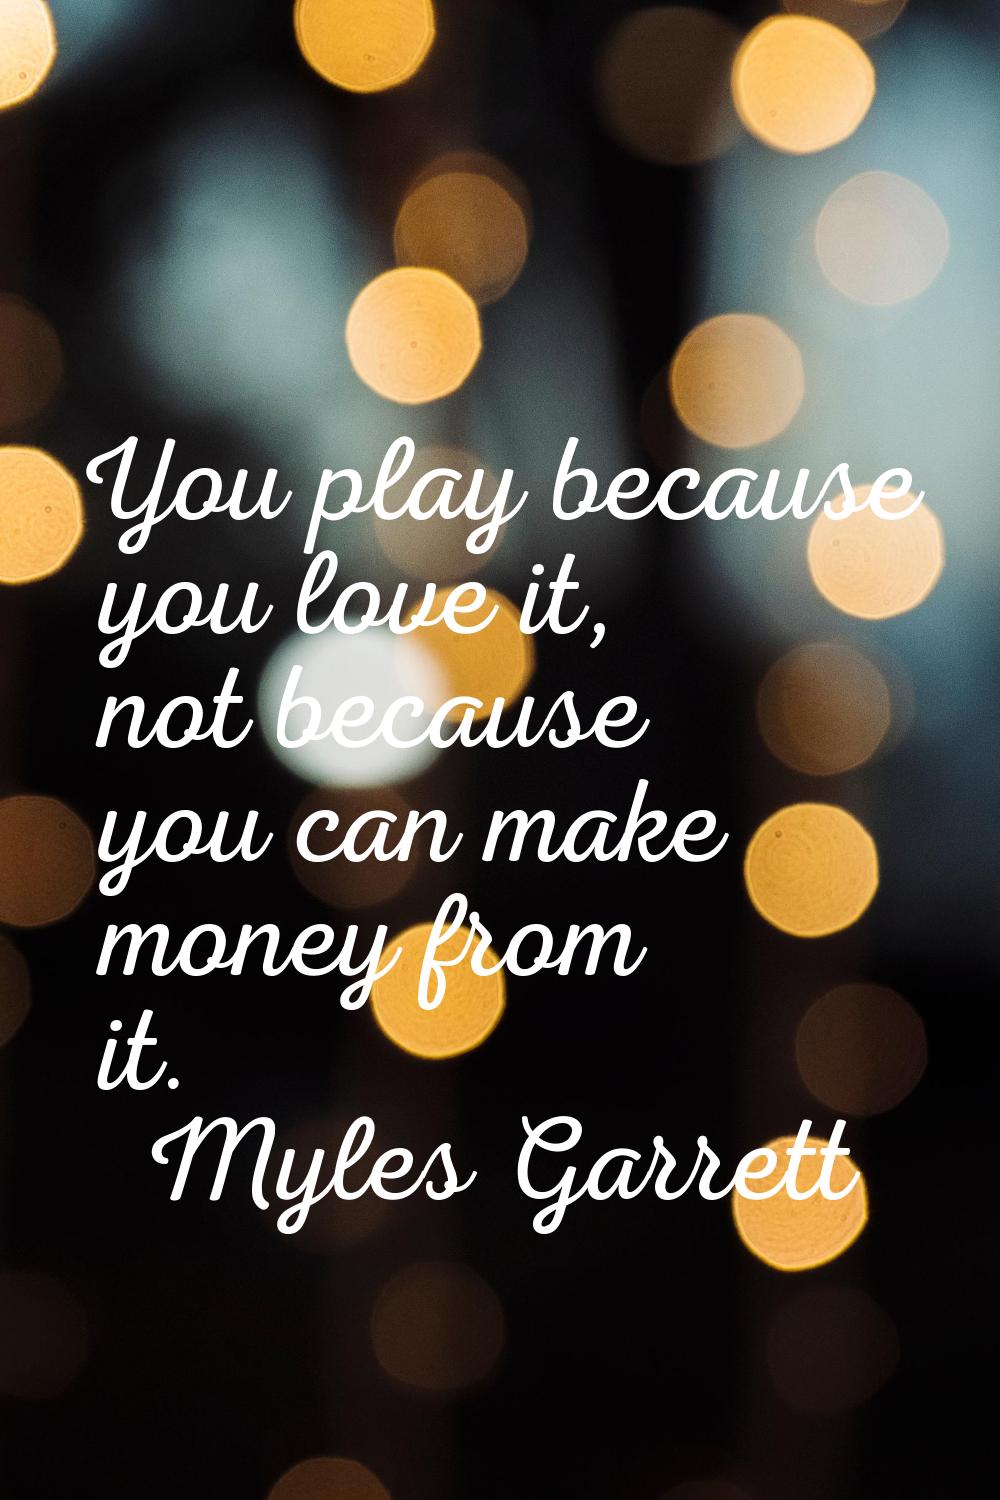 You play because you love it, not because you can make money from it.